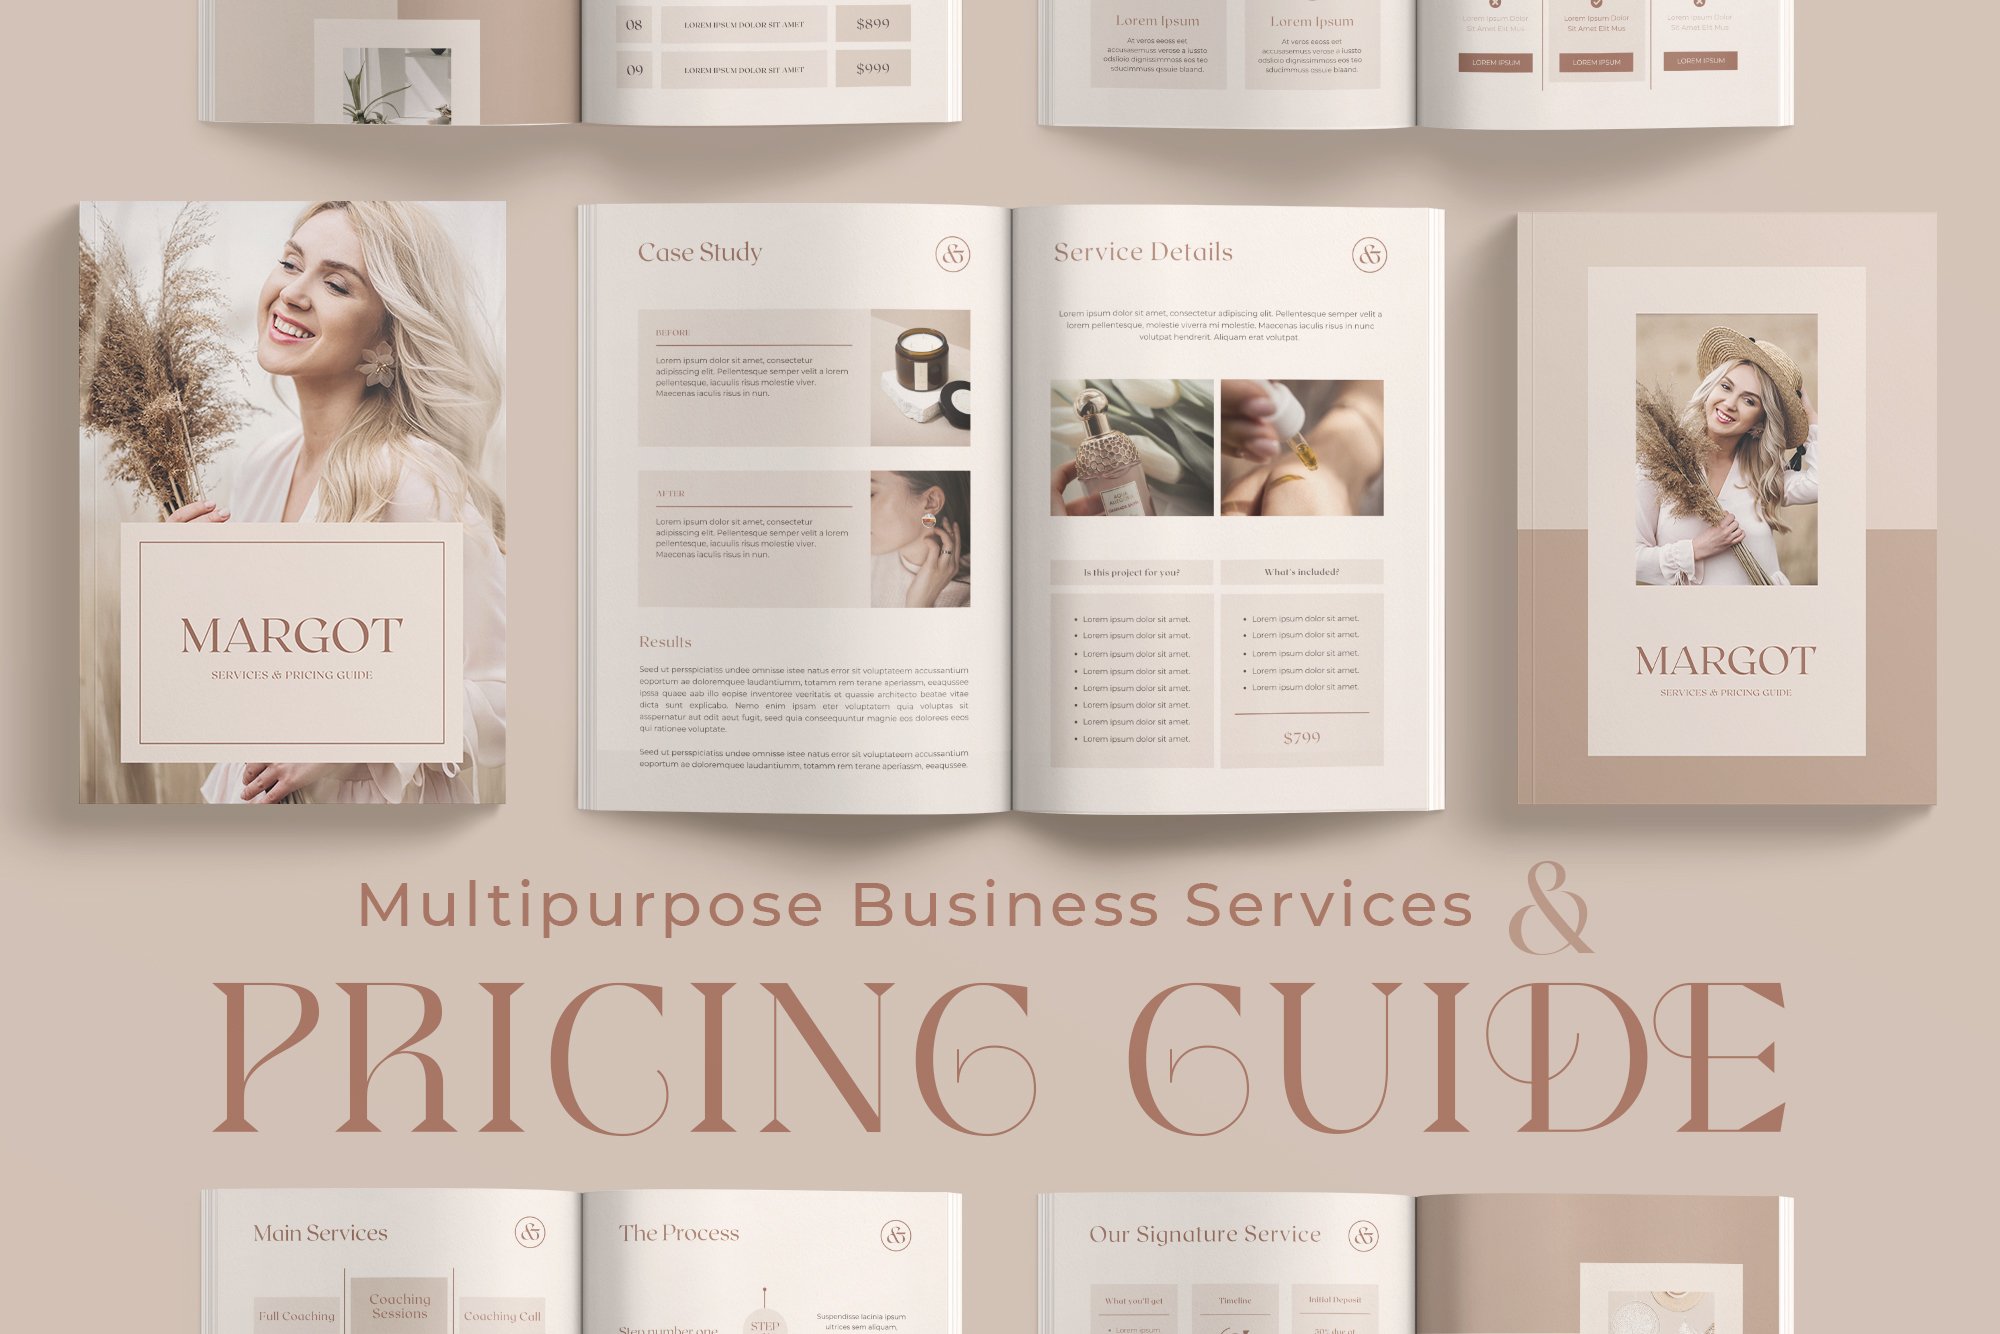 Services and Pricing Guide Template cover image.